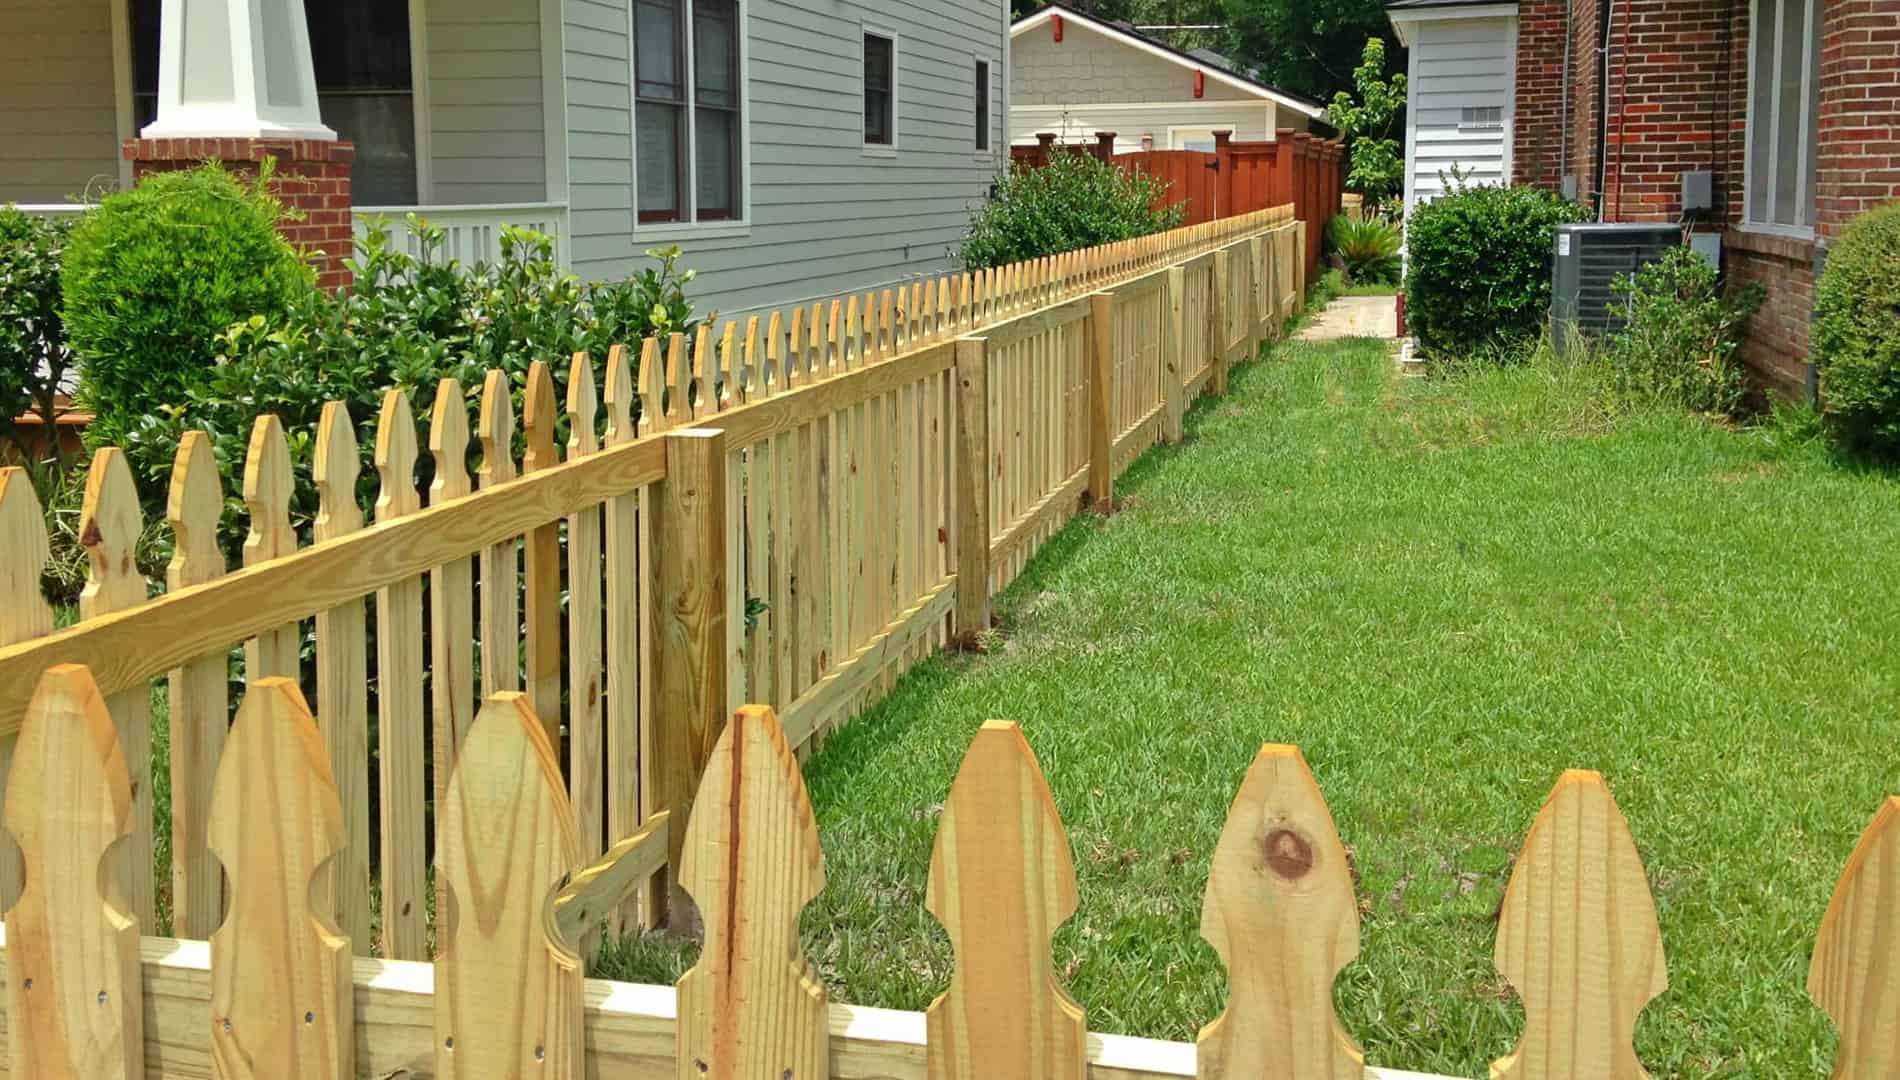 Wood picket fence from Boise Fence Company